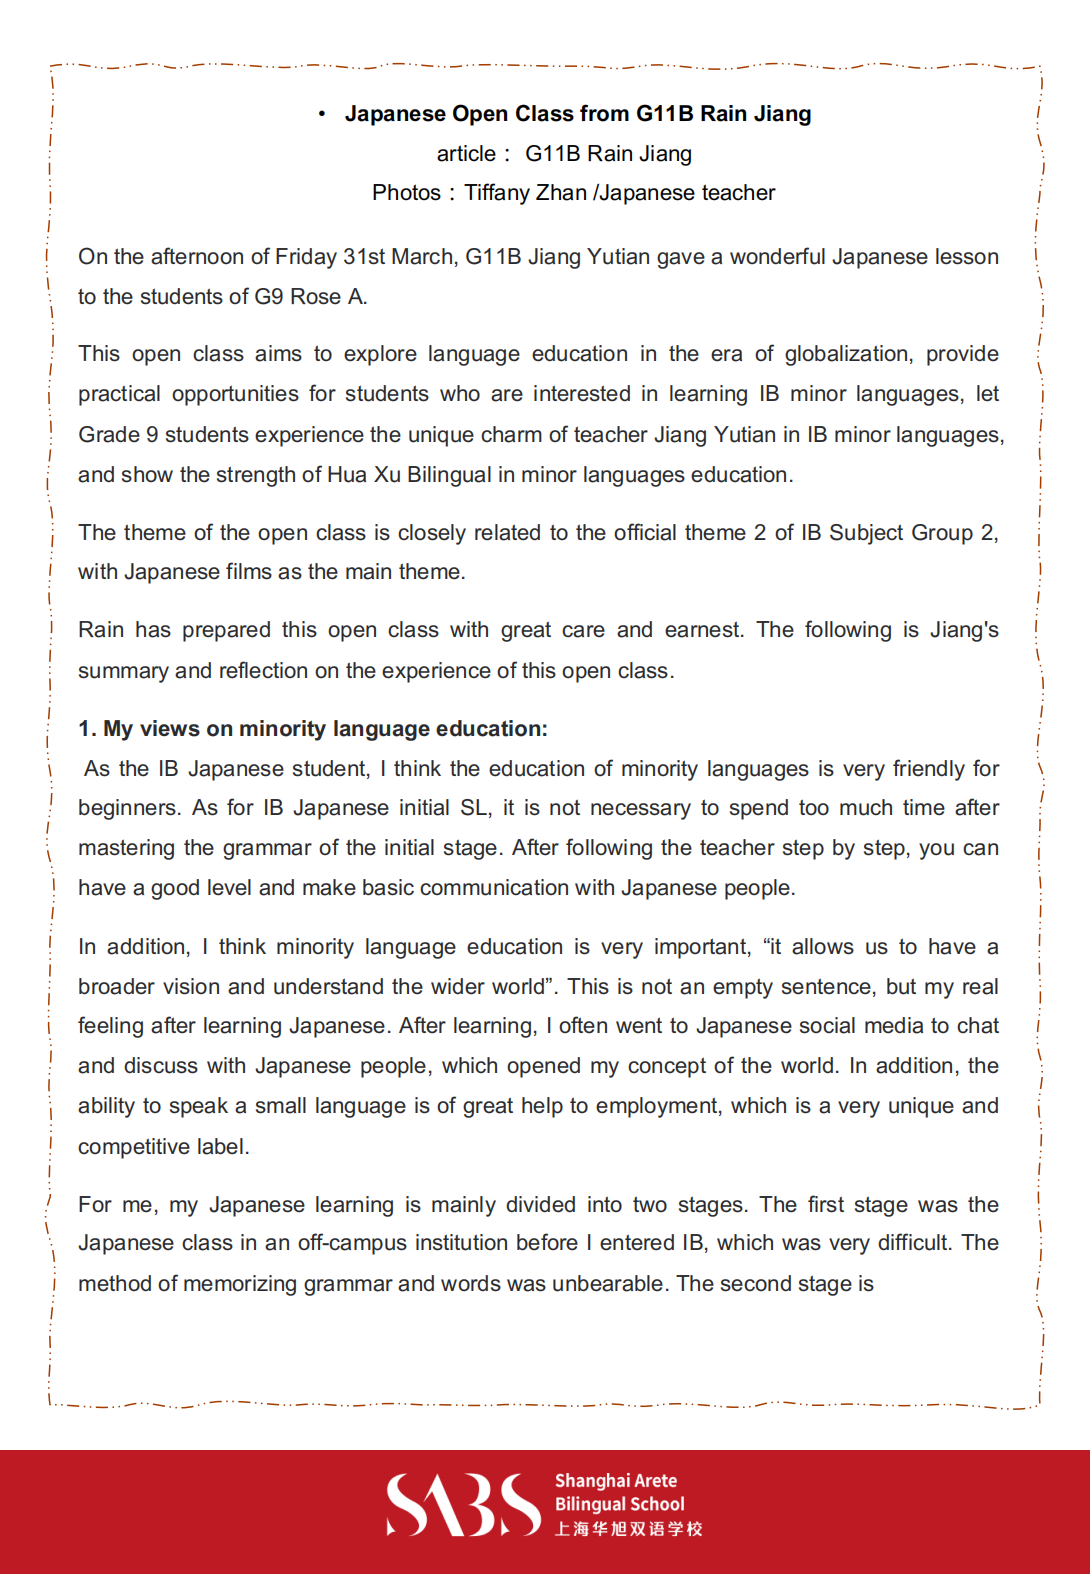 HS 4th Issue Newsletter pptx（English）_13.png